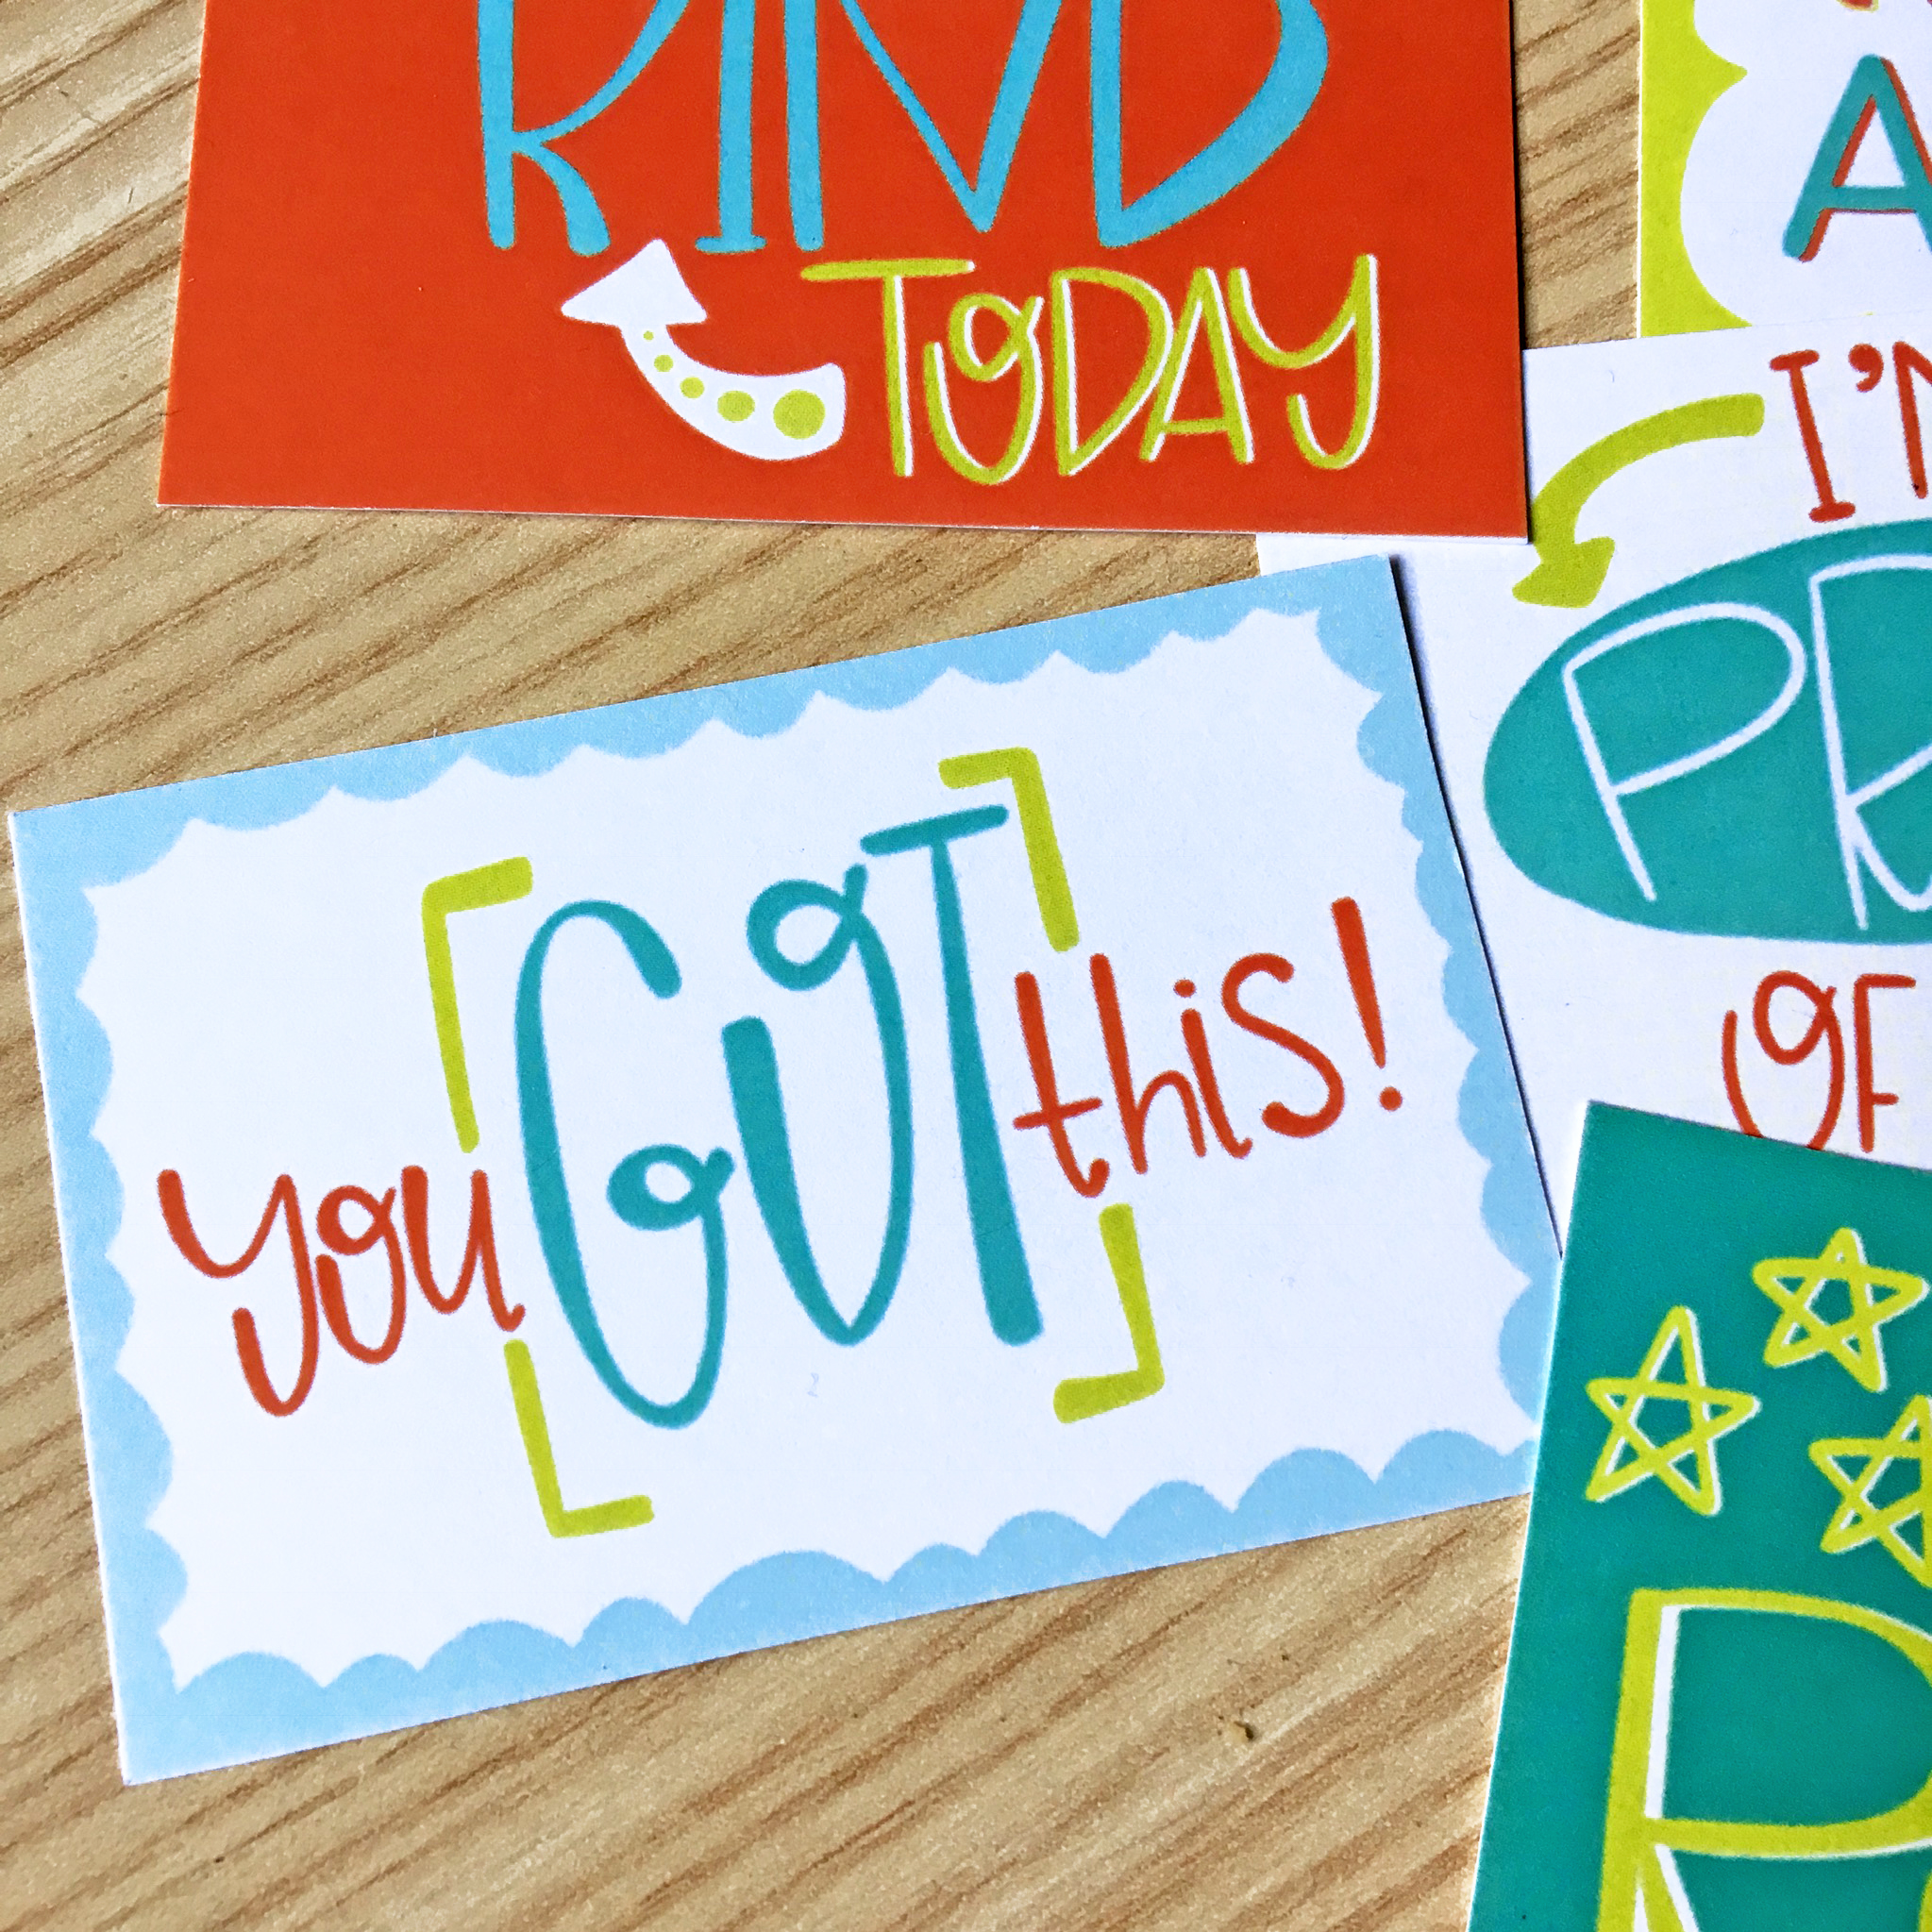 Free Printable Lunch Box Notes | These lunchbox notes have encouraging messages on them in bright happy colors! 